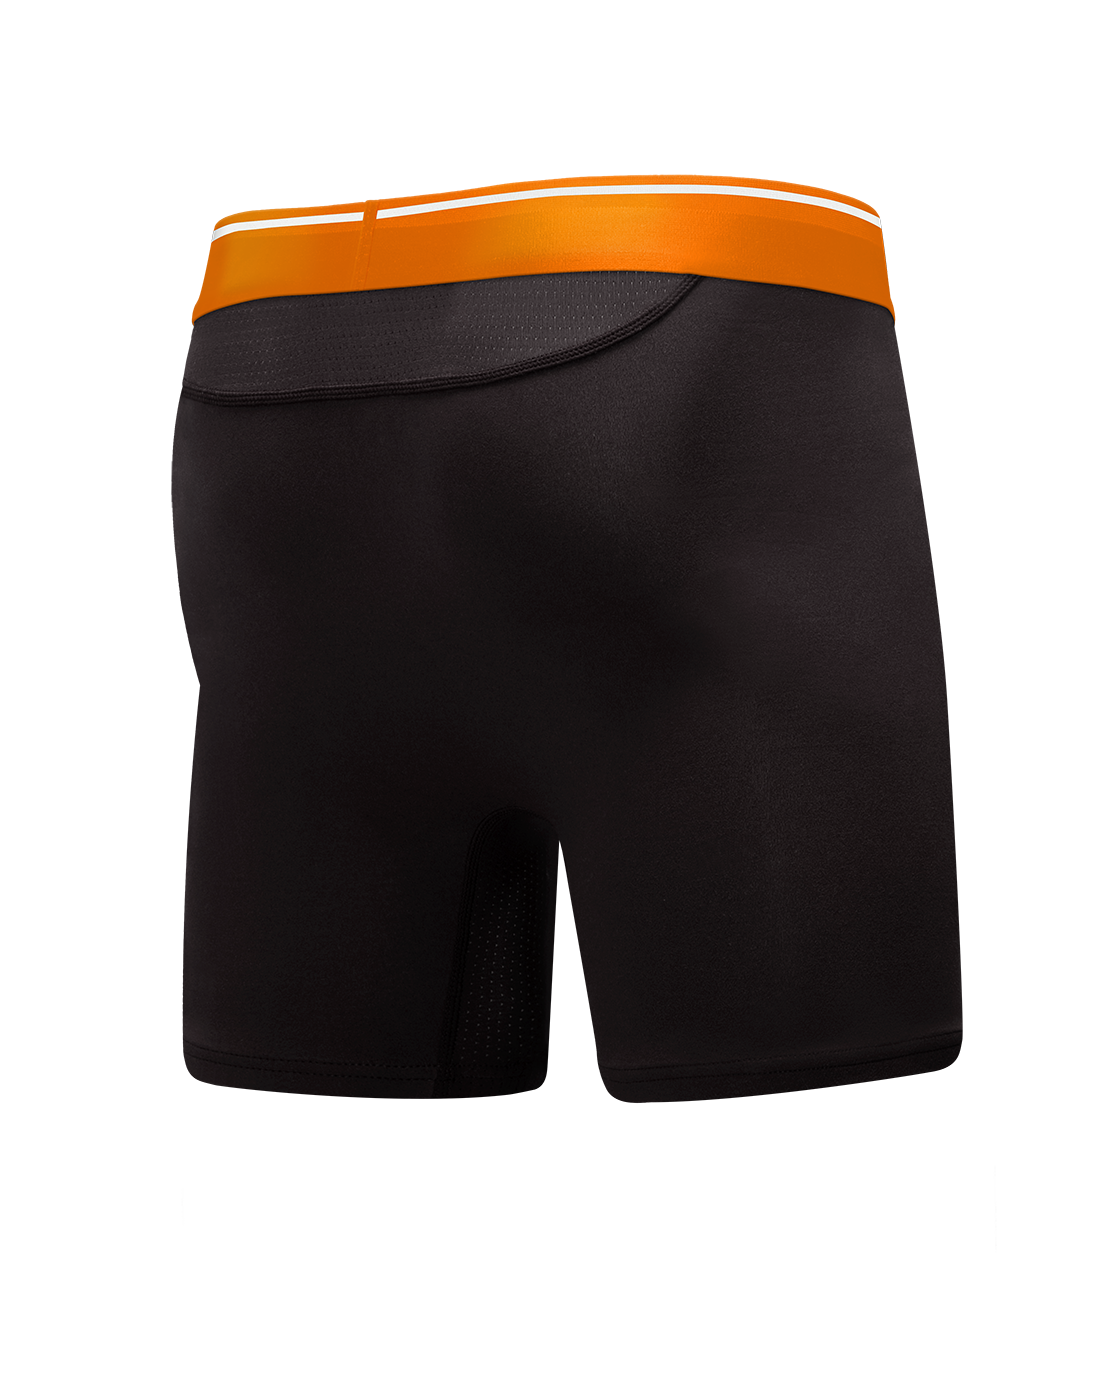 Soft boxer shorts, without labels or noticeable seams. Organic